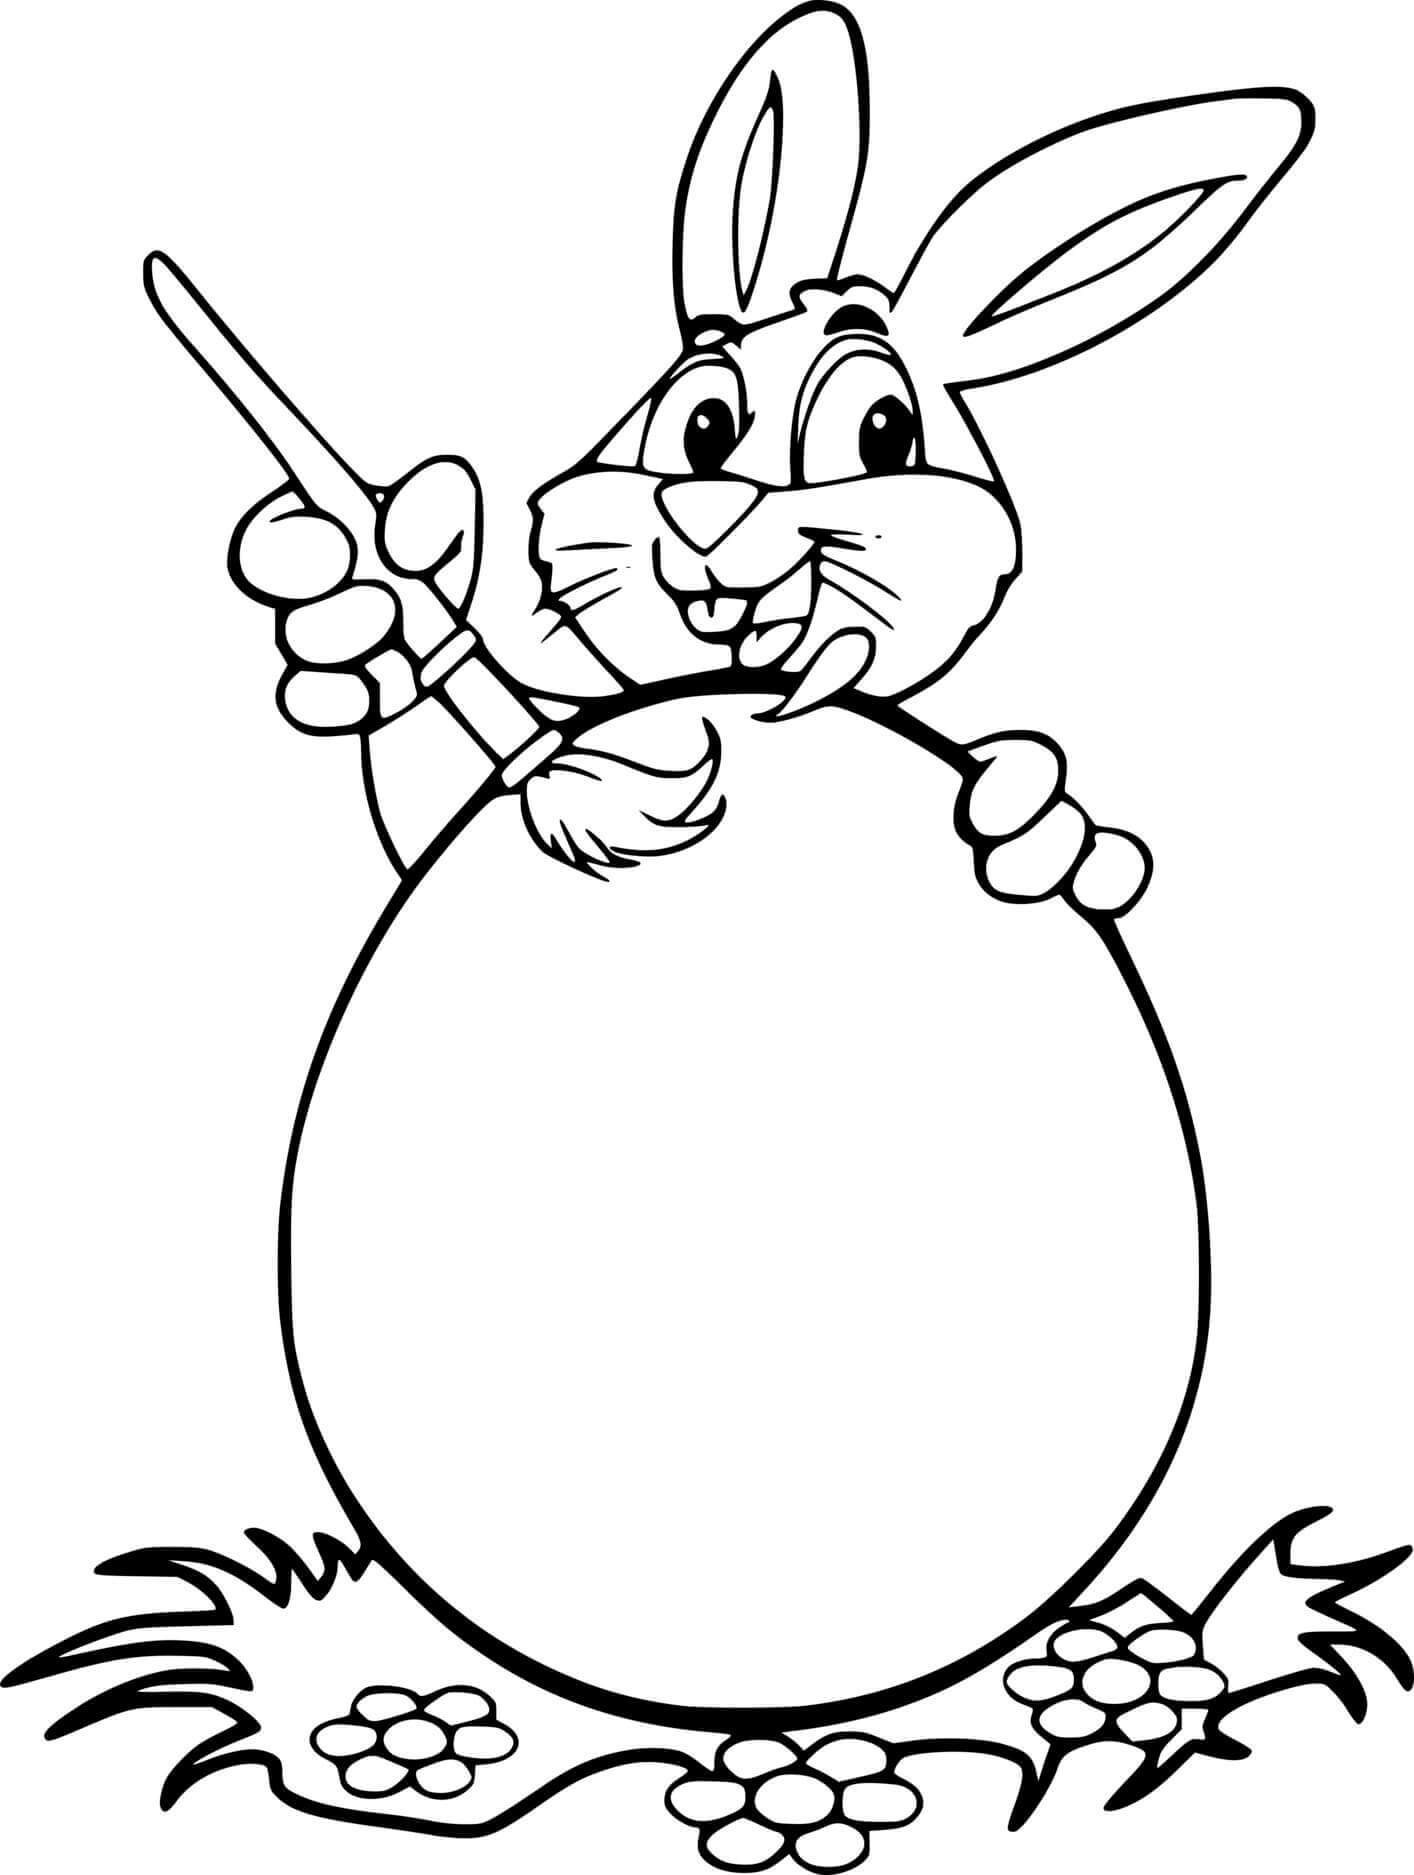 Easter Bunny Painting The Egg Coloring Page